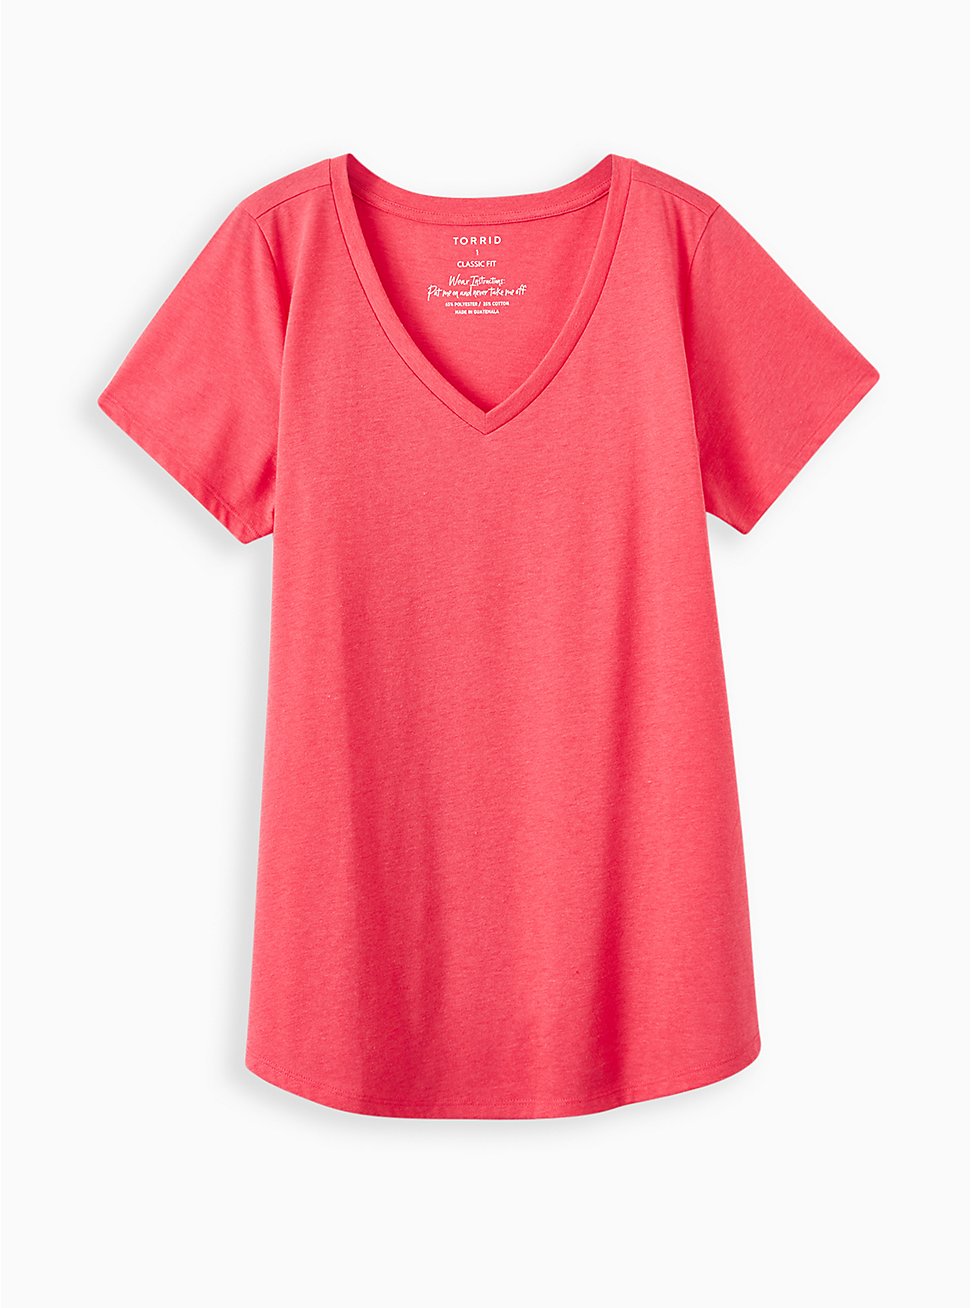 Plus Size Girlfriend Tee - Signature Jersey Bright Berry, TEABERRY, hi-res